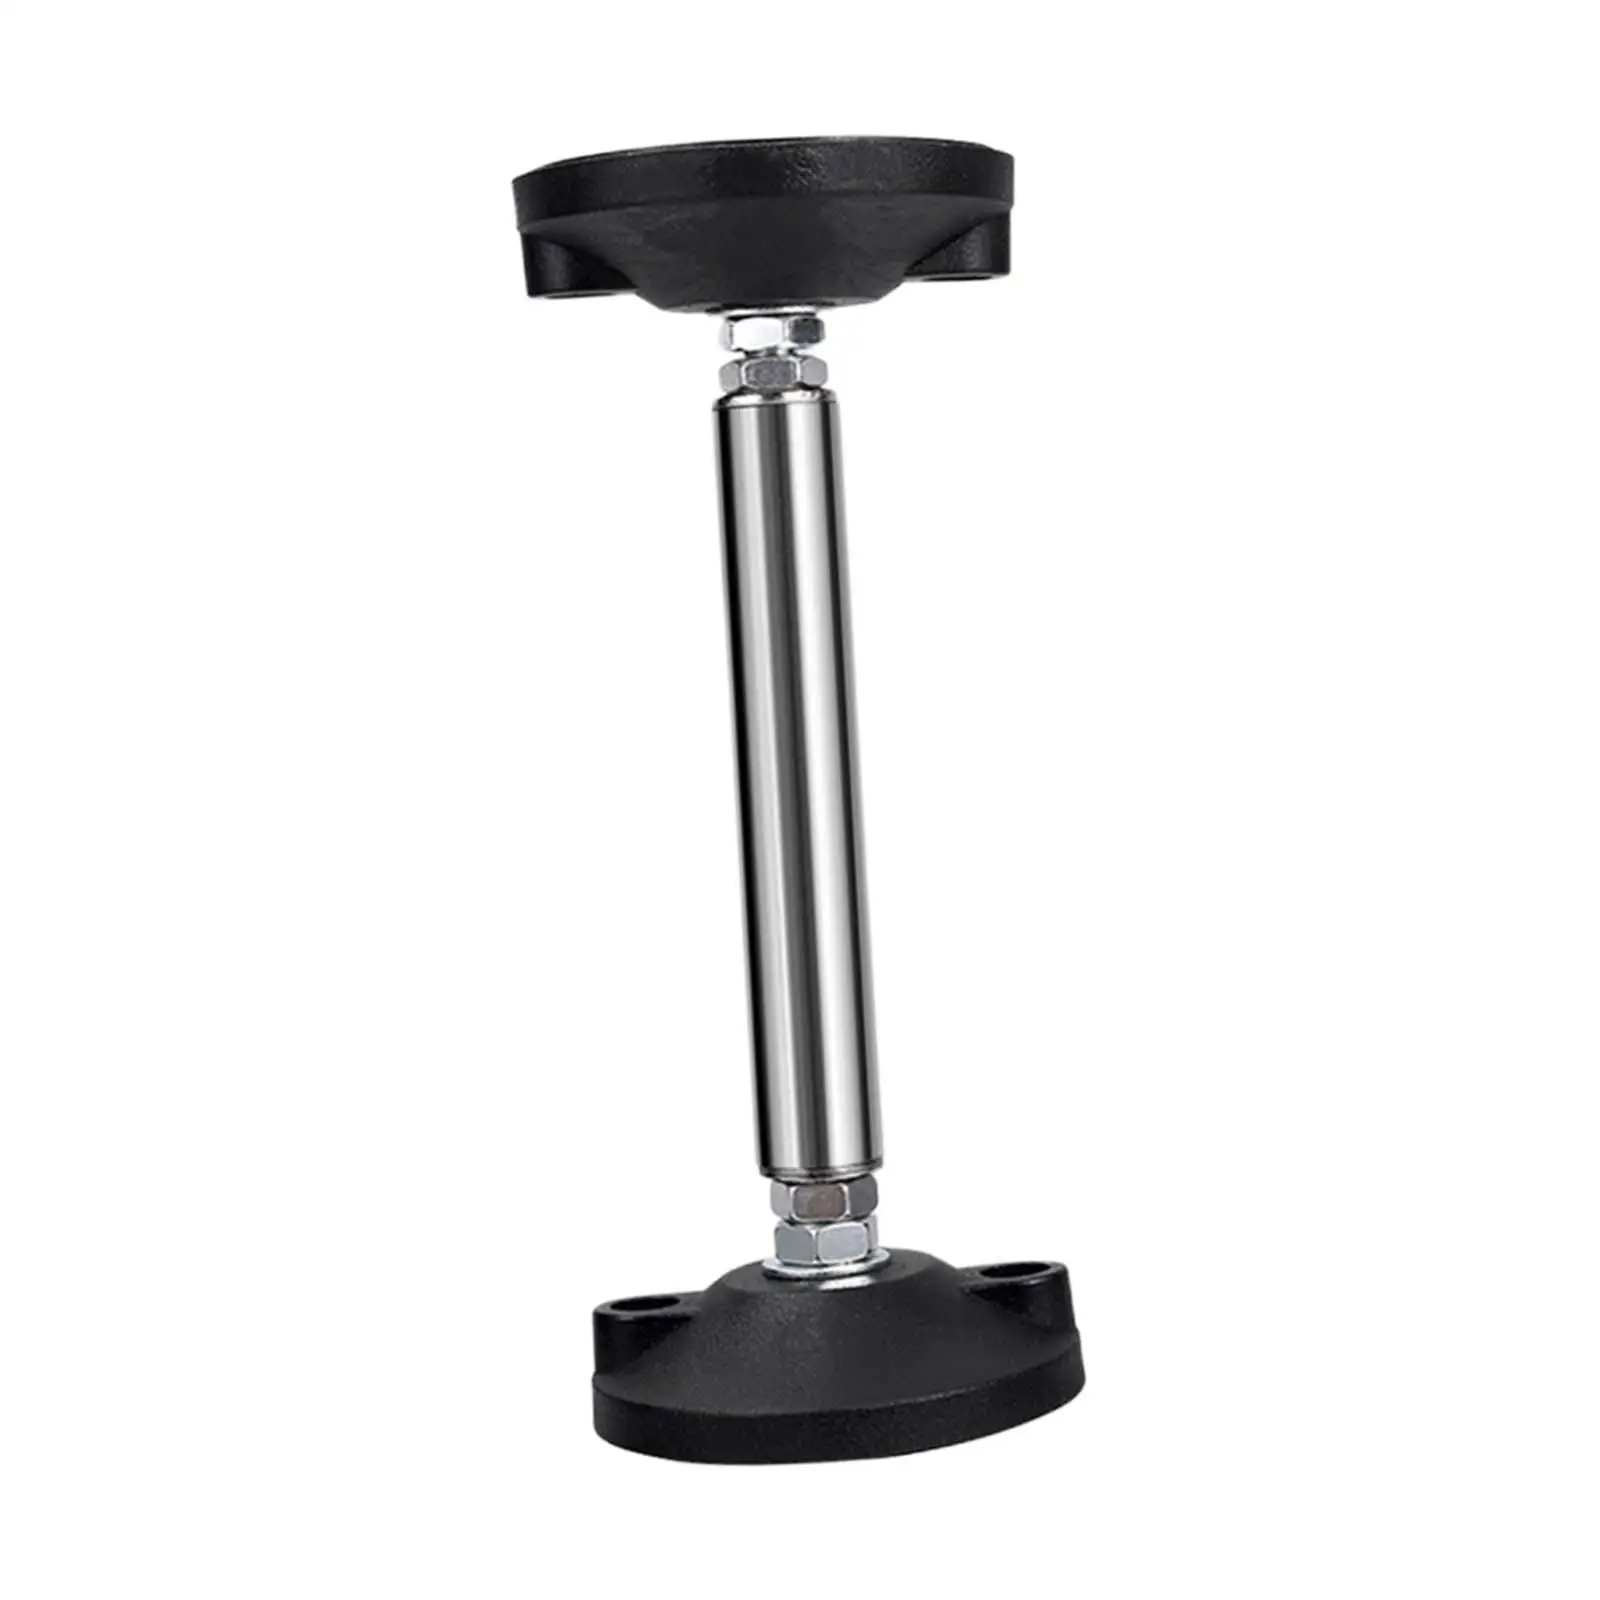 Adjustable Height Strong Bearing Capacity Thicken Stainless Steel Material Stable Base Rustproof Kitchen Bathroom Cupboard Foot